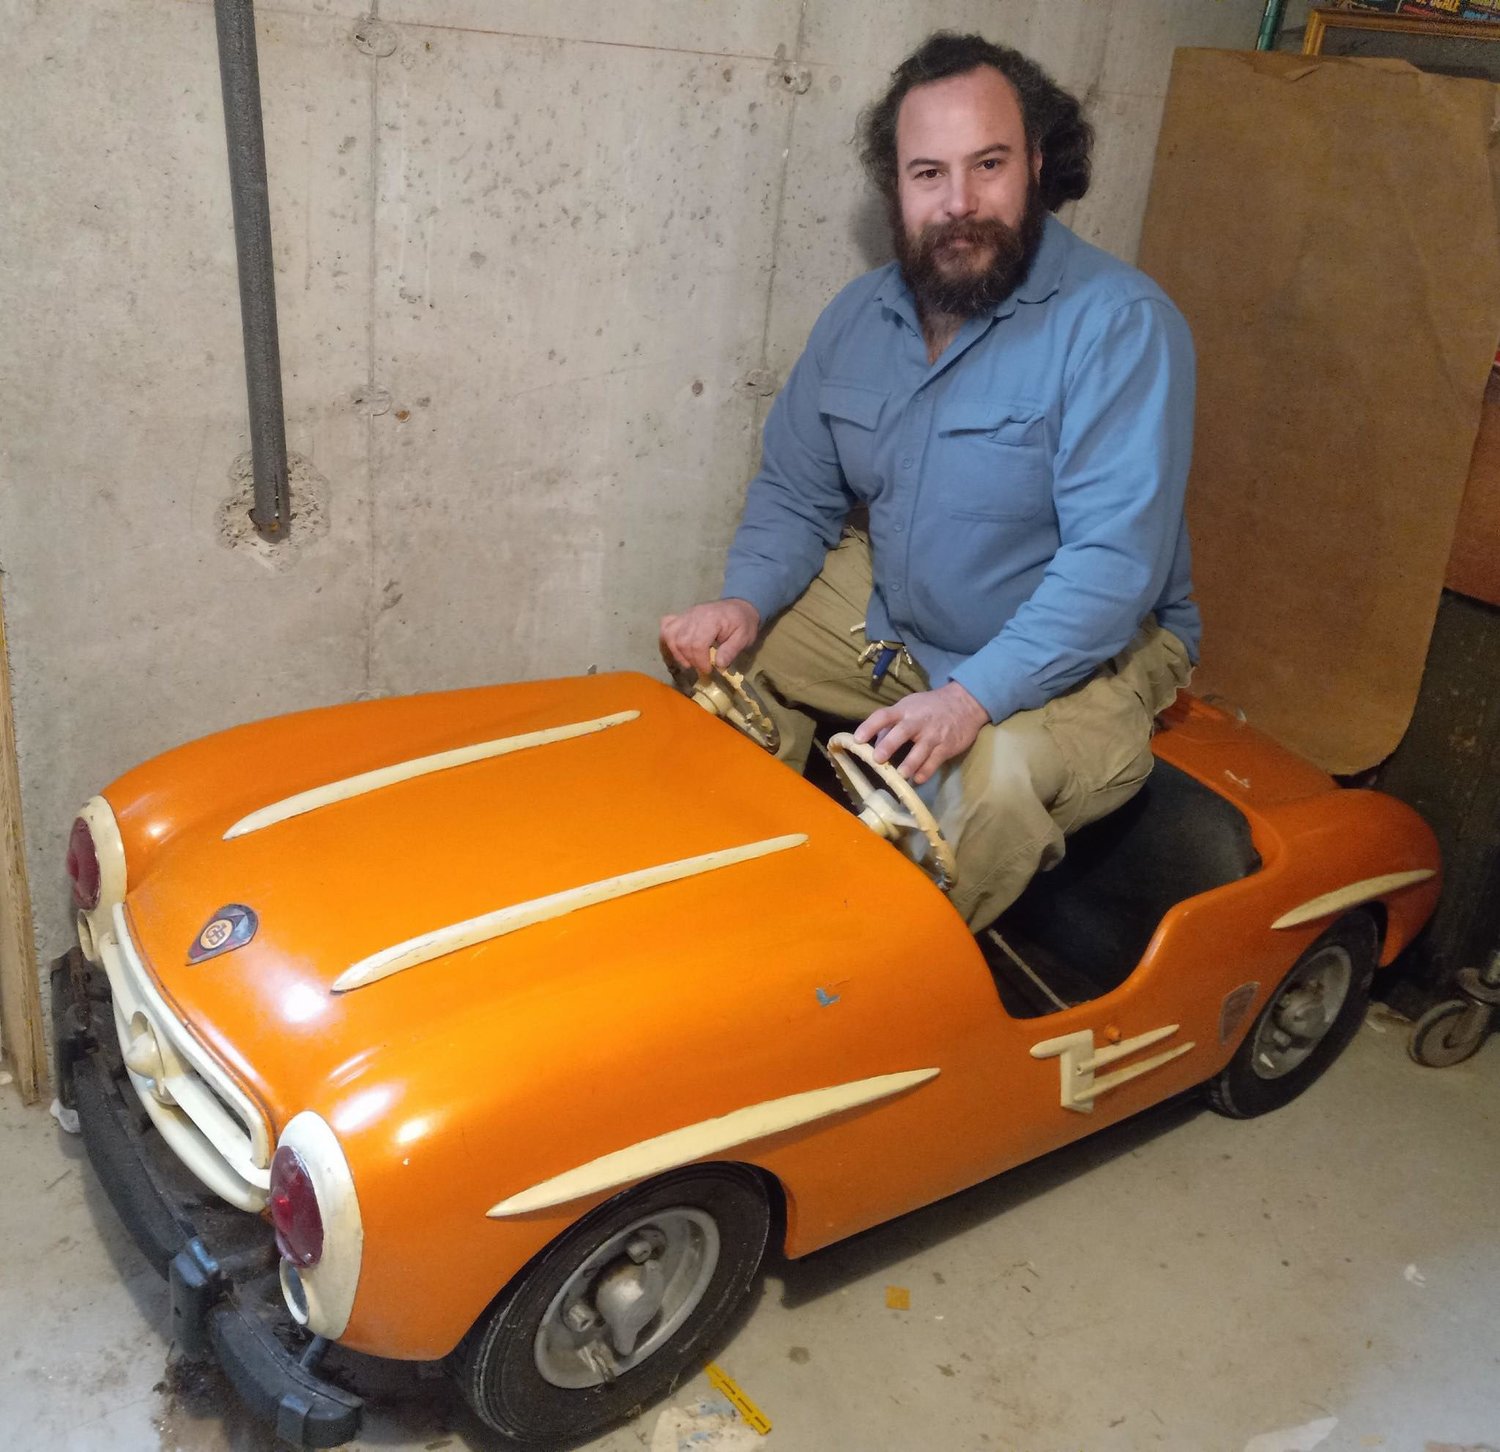 Being a collector himself, Sam Pardo, a co-manager of Hidden Thrift and vendor at Cabinet of Curiosities, owns one of cars from Nunley’s Carousel, among other Baldwin memorabilia.